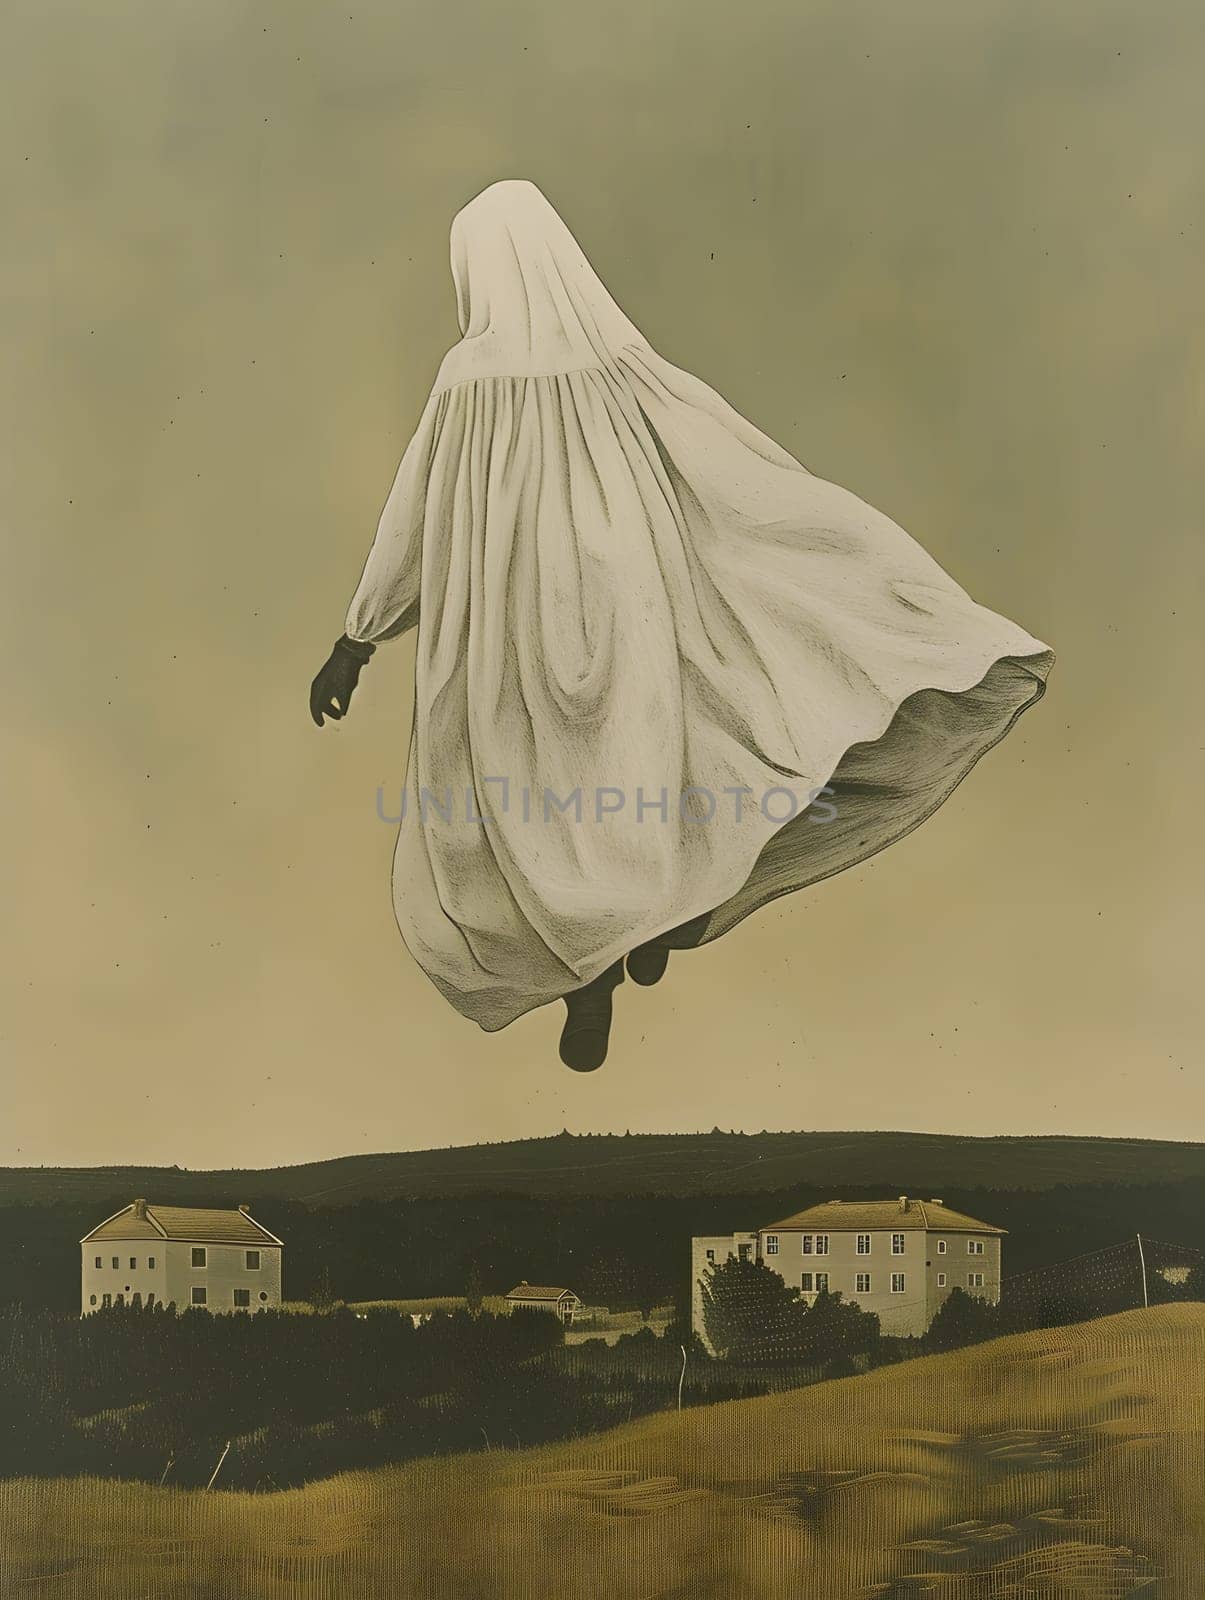 A figure in a white dress soars through the sky, resembling a painting in motion. The flowing fabric mimics wings as it dances among the trees and plants below